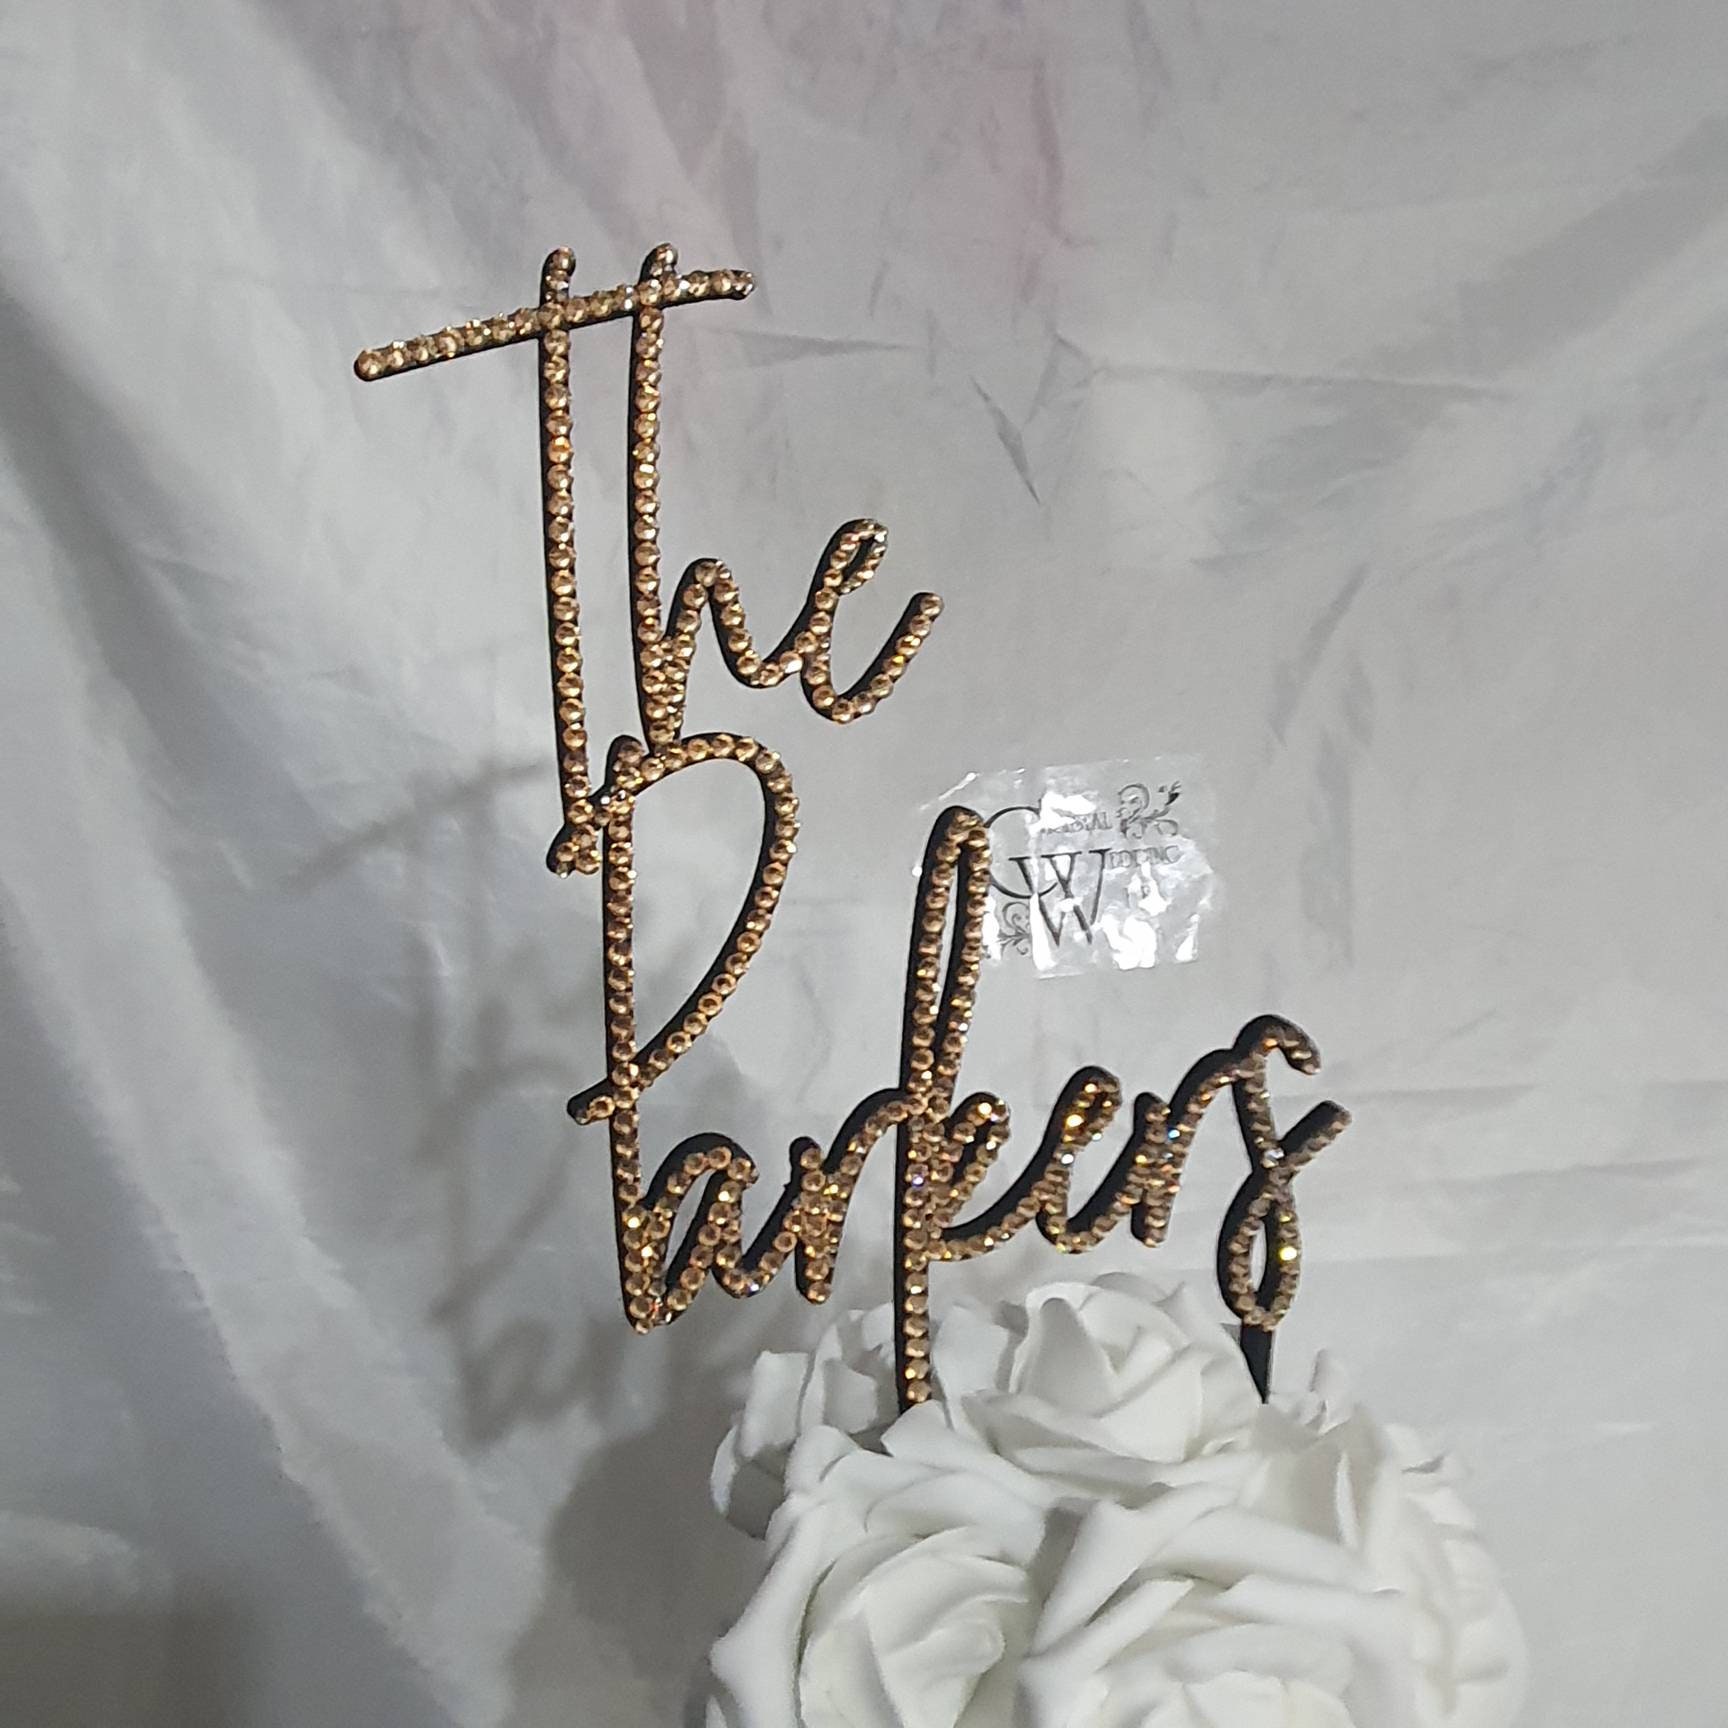 Efavormart 2.5 Tall Gold Shinny Rhinestone Letters Cake Toppers For  Wedding Birthday Party Special Event Decorations - Letter Y